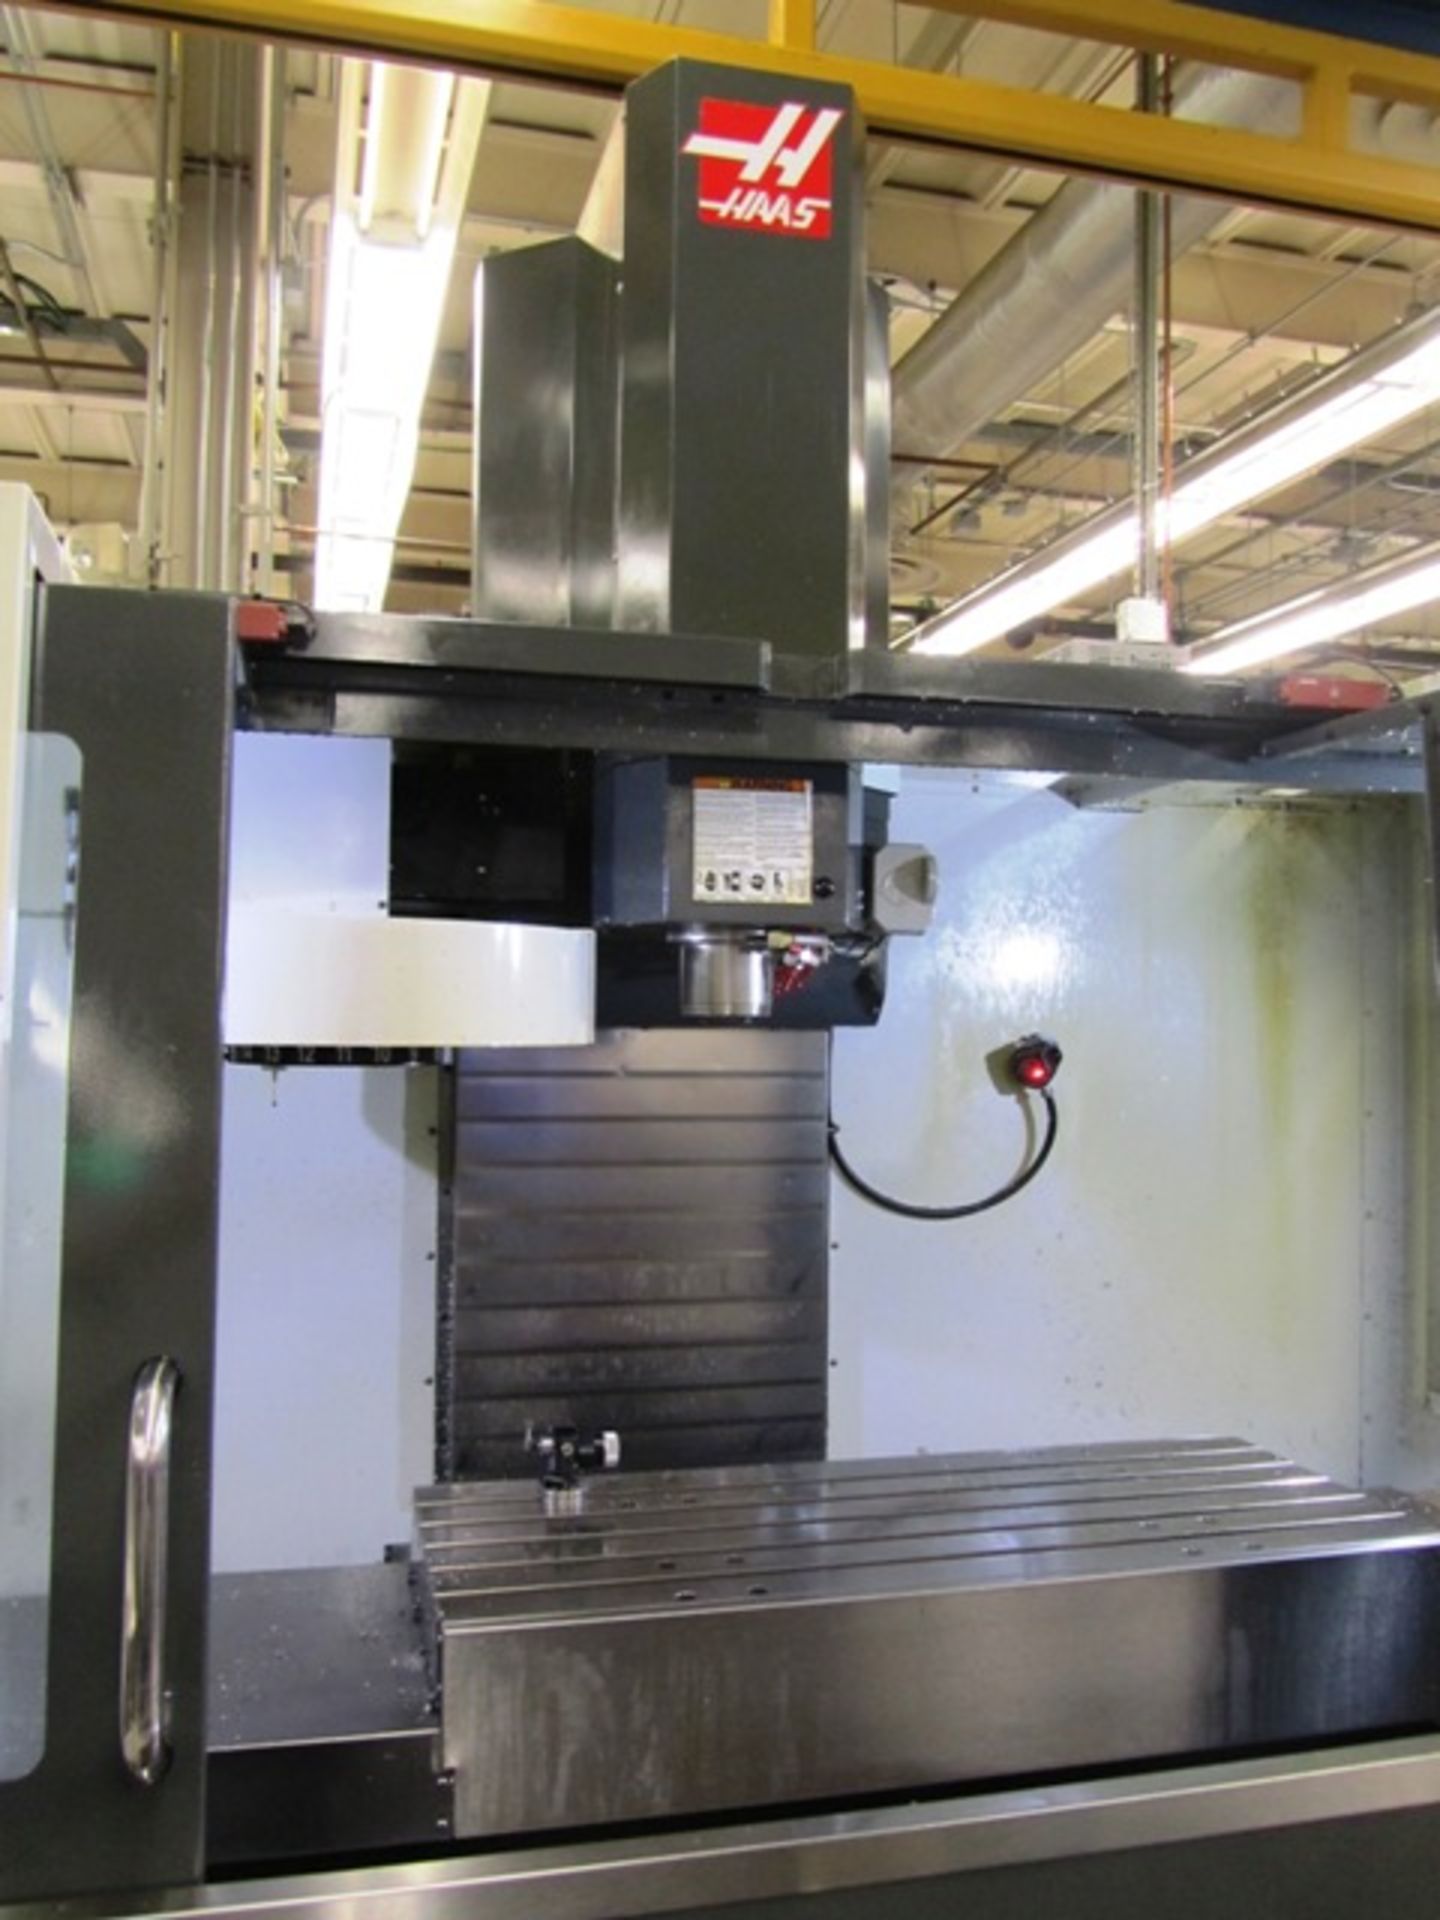 Haas VF-3 CNC Vertical Machining Center - Image 5 of 5